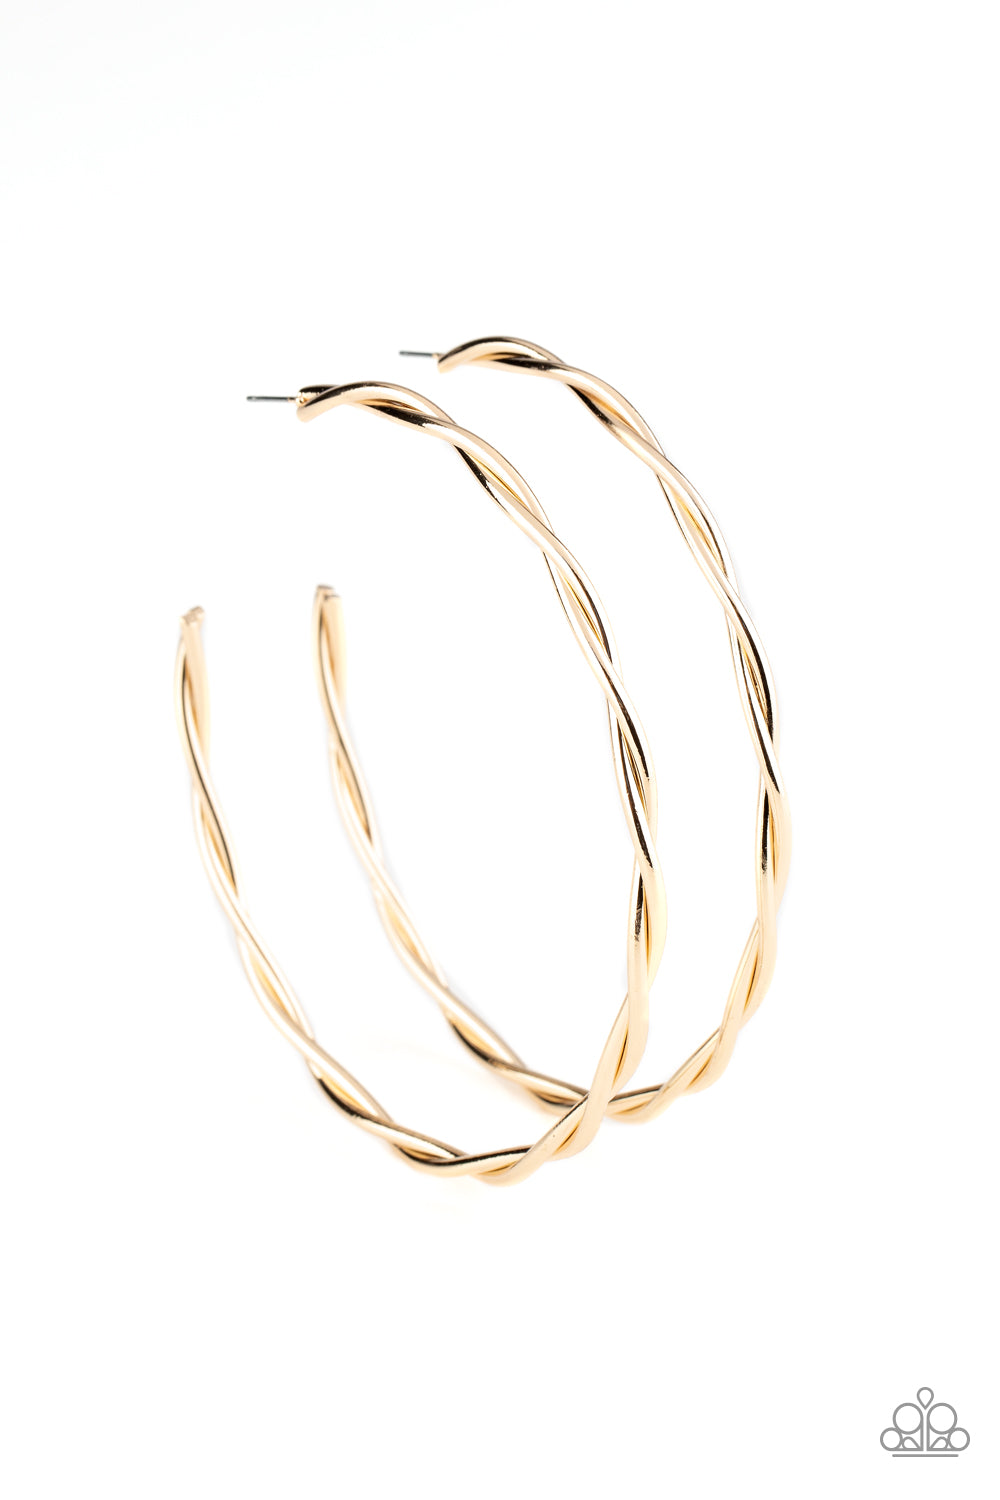 Out of Control Curves - Gold Earrings - Paparazzi Accessories - Paparazzi Accessories 